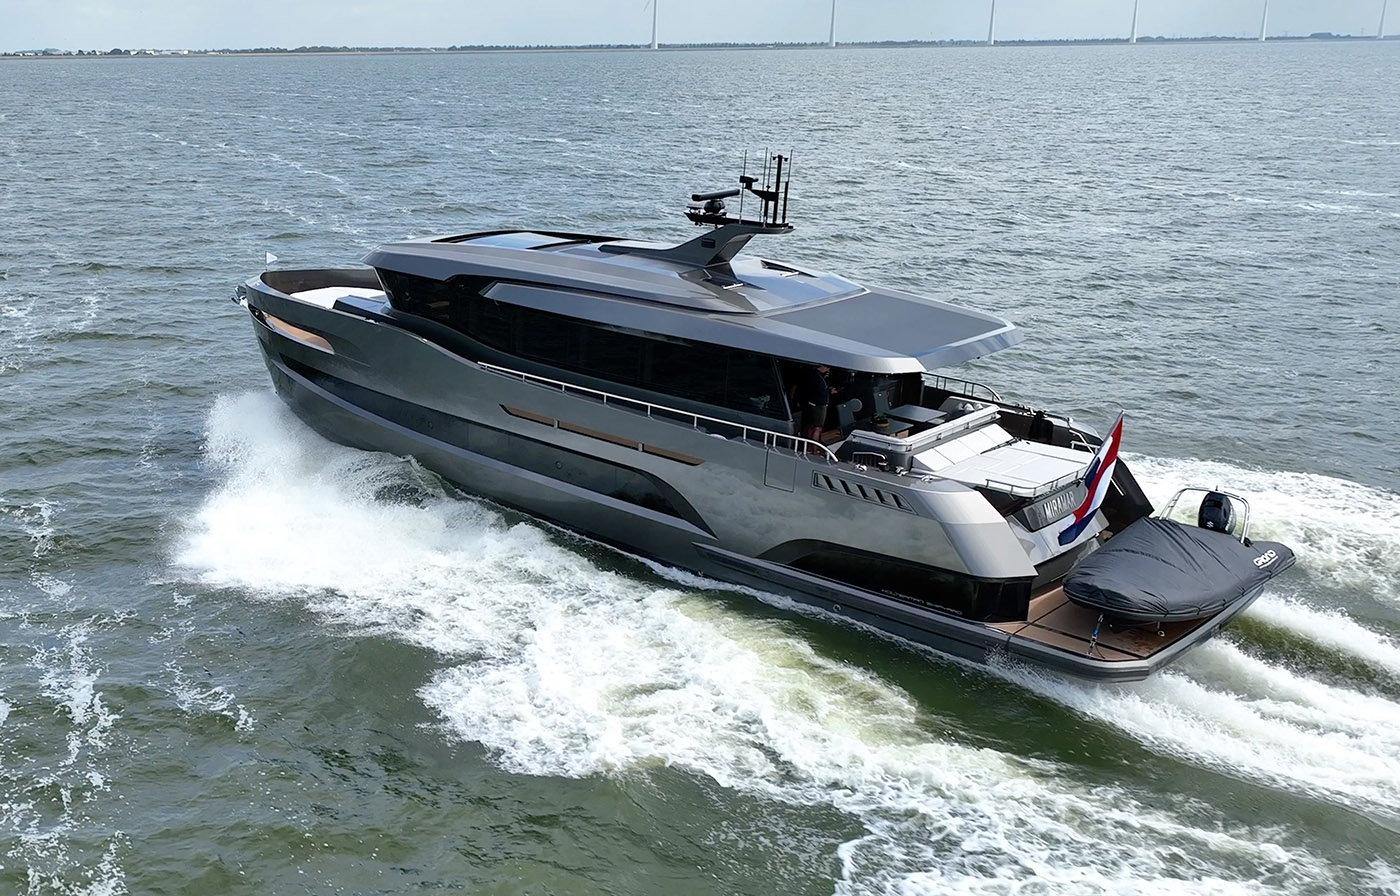 The X-78 sport is a yacht with powerful capacity